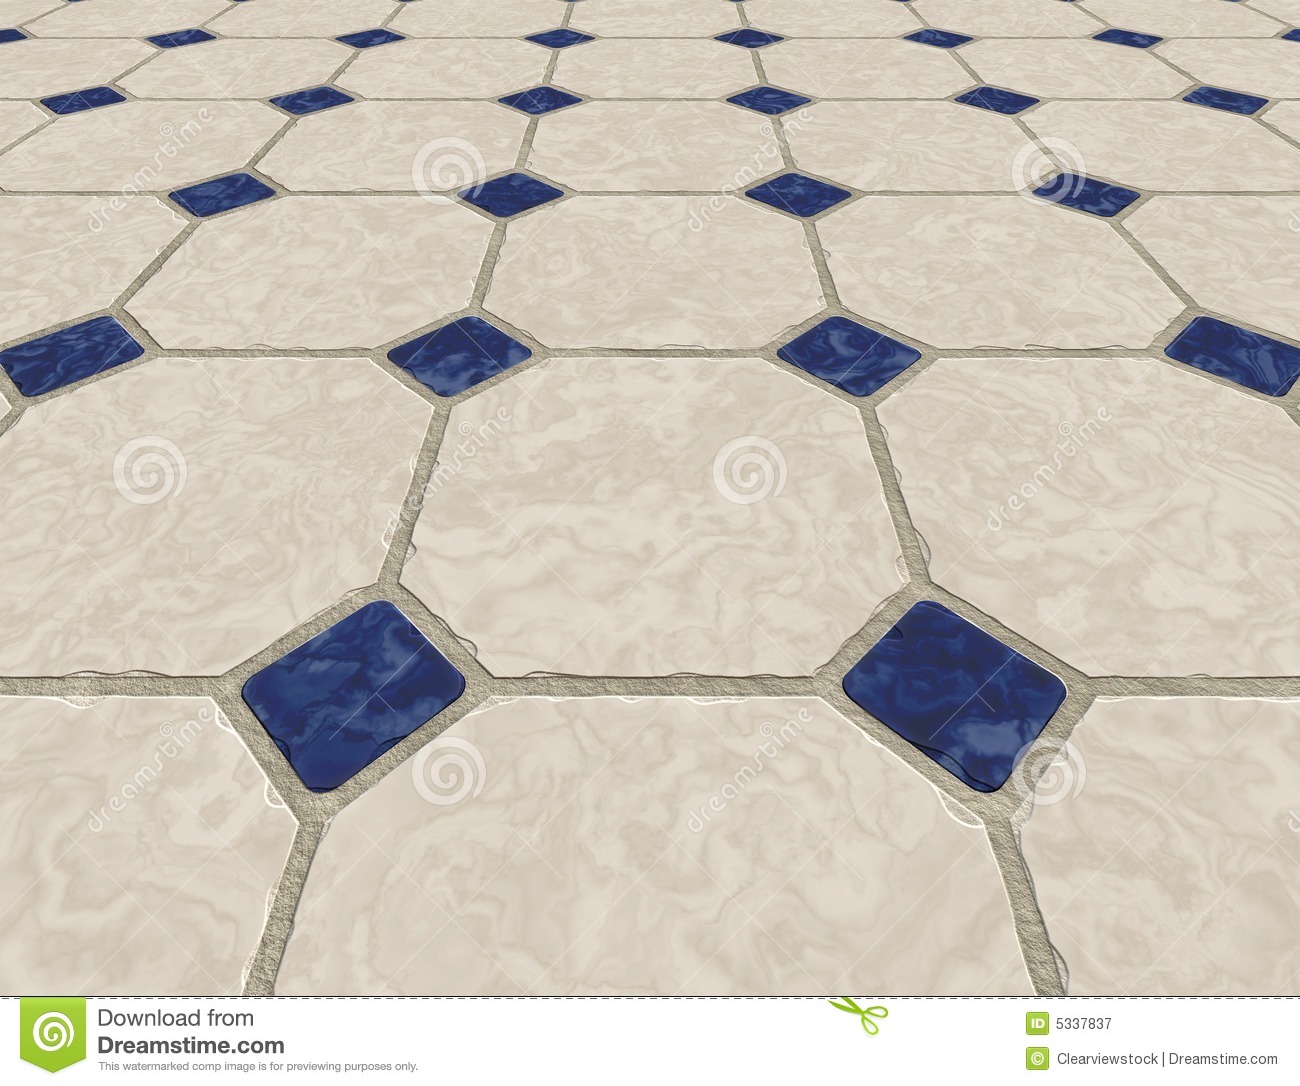 Marble Tiled Floor Tiles Royalty Free Stock Photography   Image    